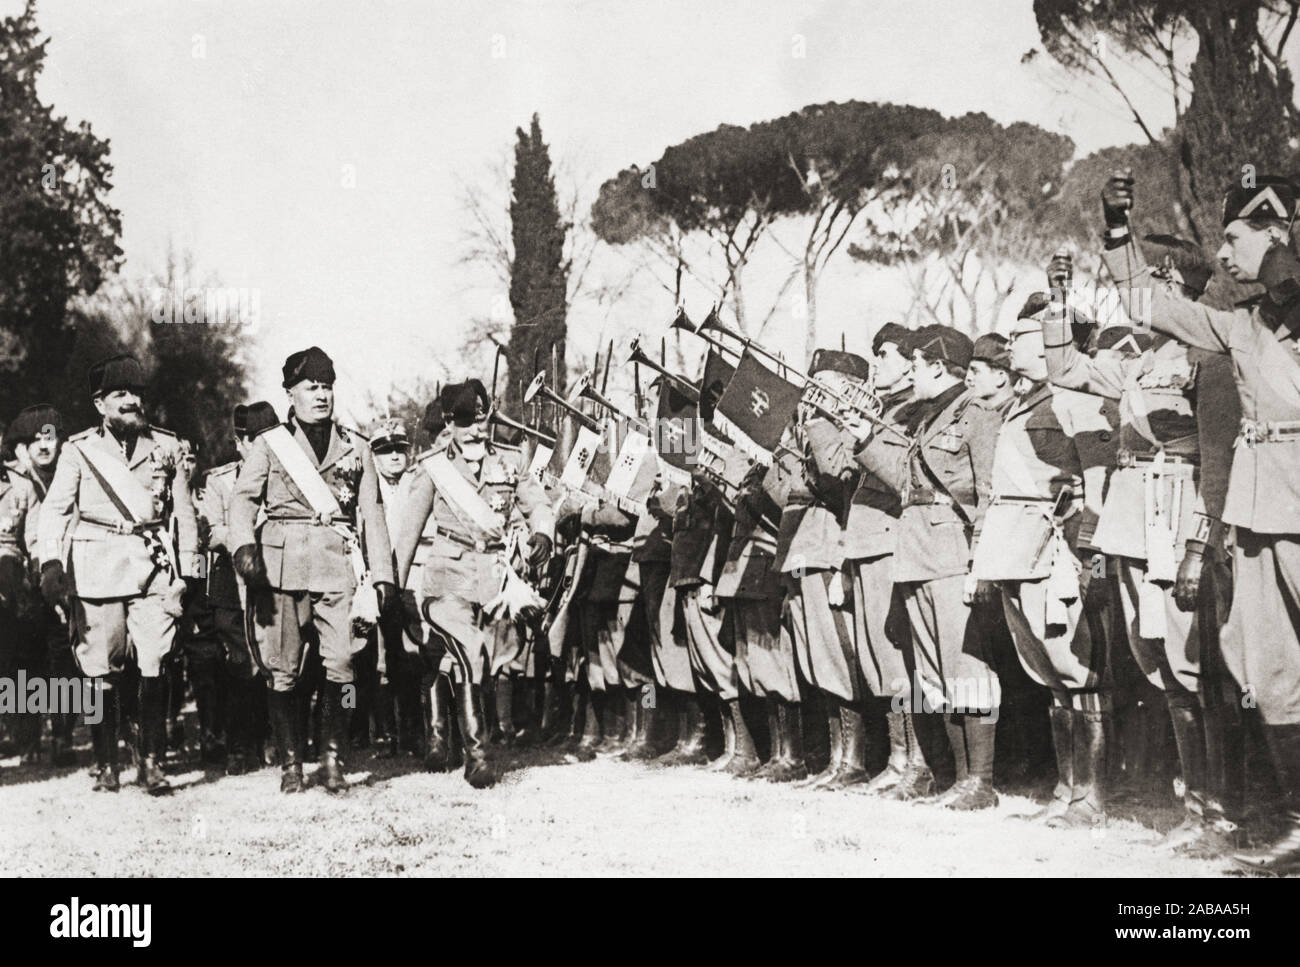 Benito Mussolini inspecting troops.  Benito Amilcare Andrea Mussolini, 1883 - 1945.  27th Prime Minister of Italy.  Also known as Il Duce, or The Leader.  Head of Italian government during World War II. Stock Photo